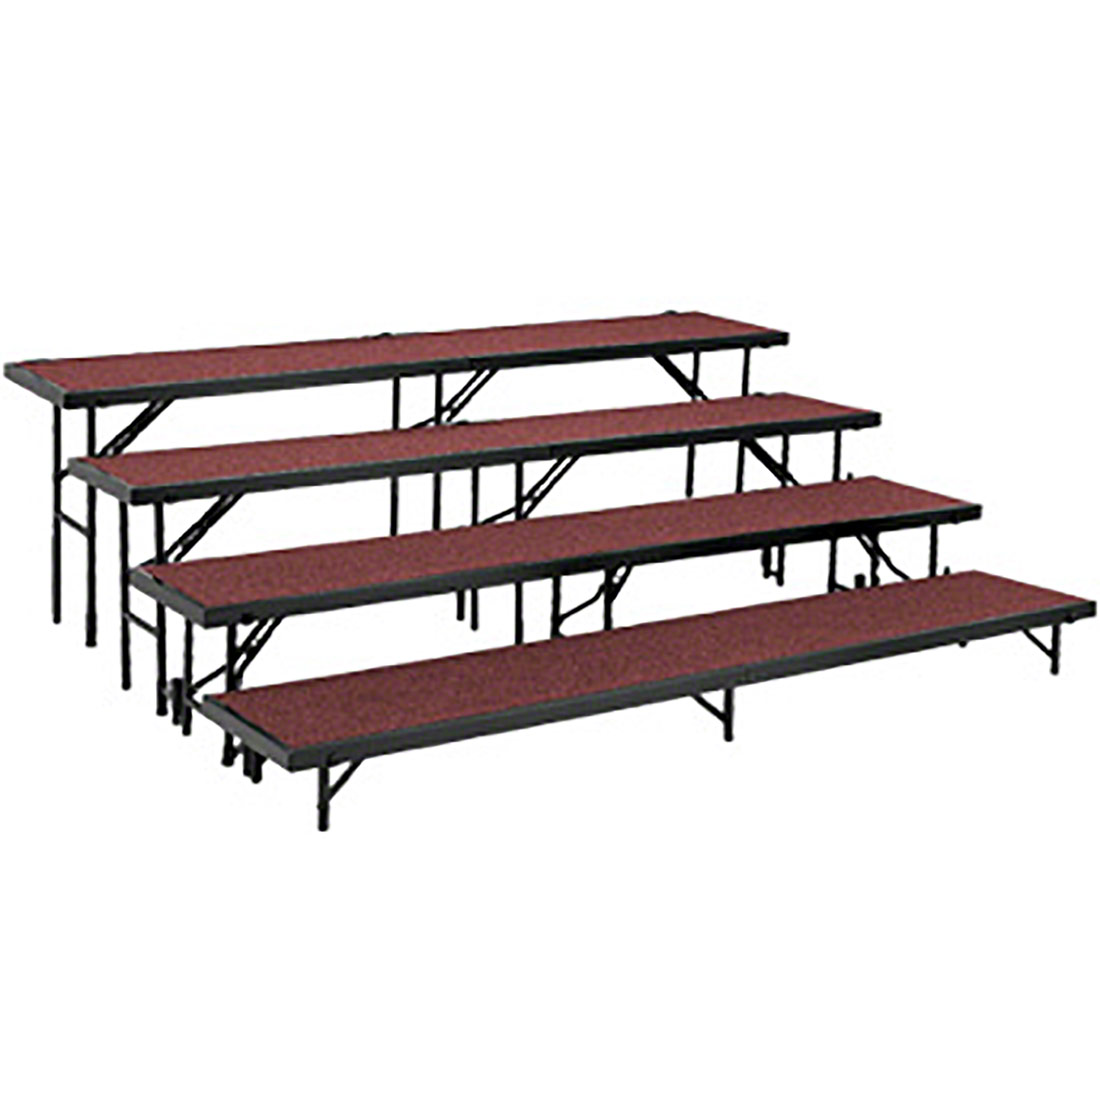 Rt4lc-40 4 Level Tapered Standing Choral Riser, Red Carpet - 18 X 96 In. Platform